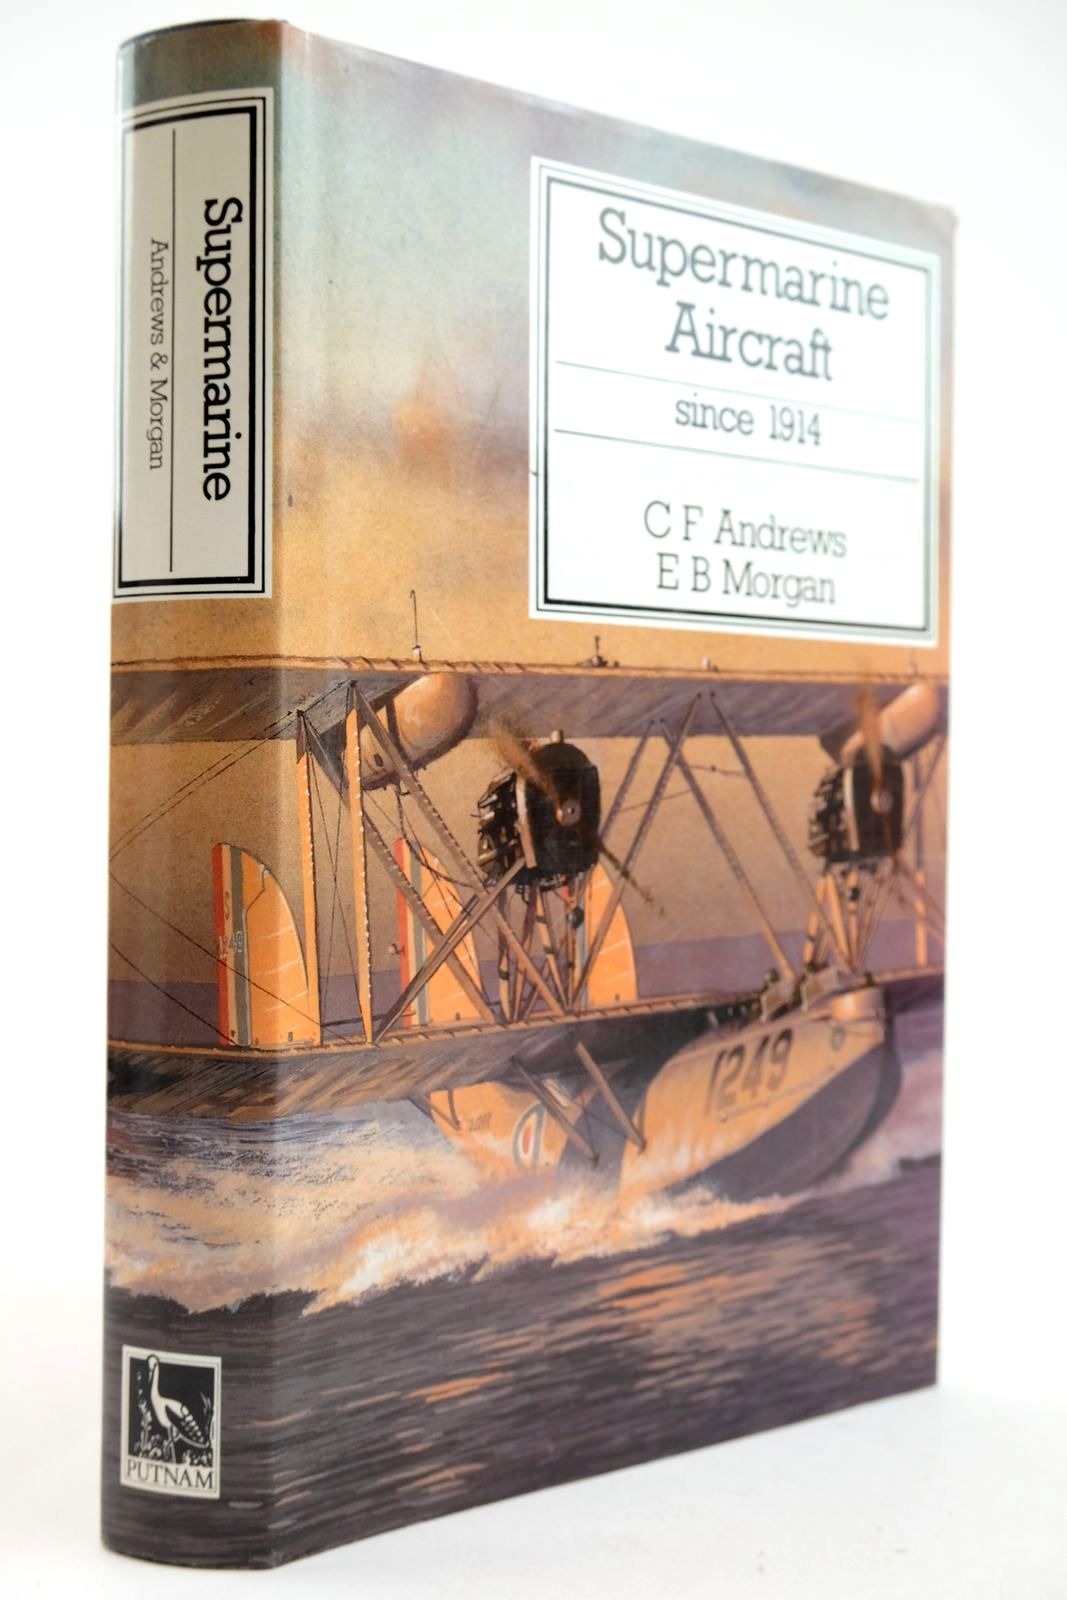 Photo of SUPERMARINE AIRCRAFT SINCE 1914 written by Andrews, C.F. Morgan, E.B. published by Putnam (STOCK CODE: 2132894)  for sale by Stella & Rose's Books